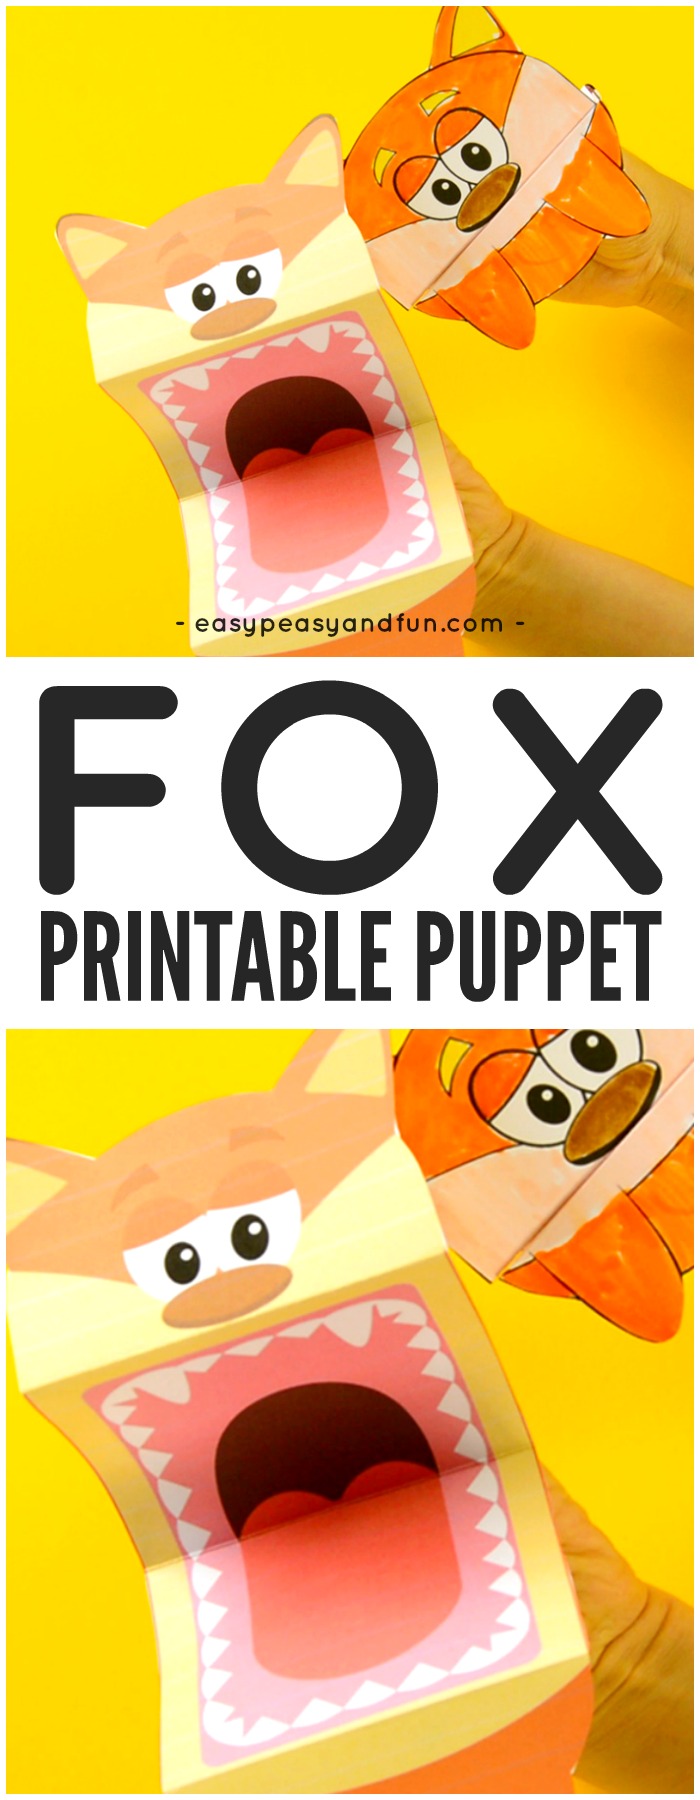 Free Printable Fox Puppets Craft for Kids to Make and Play With